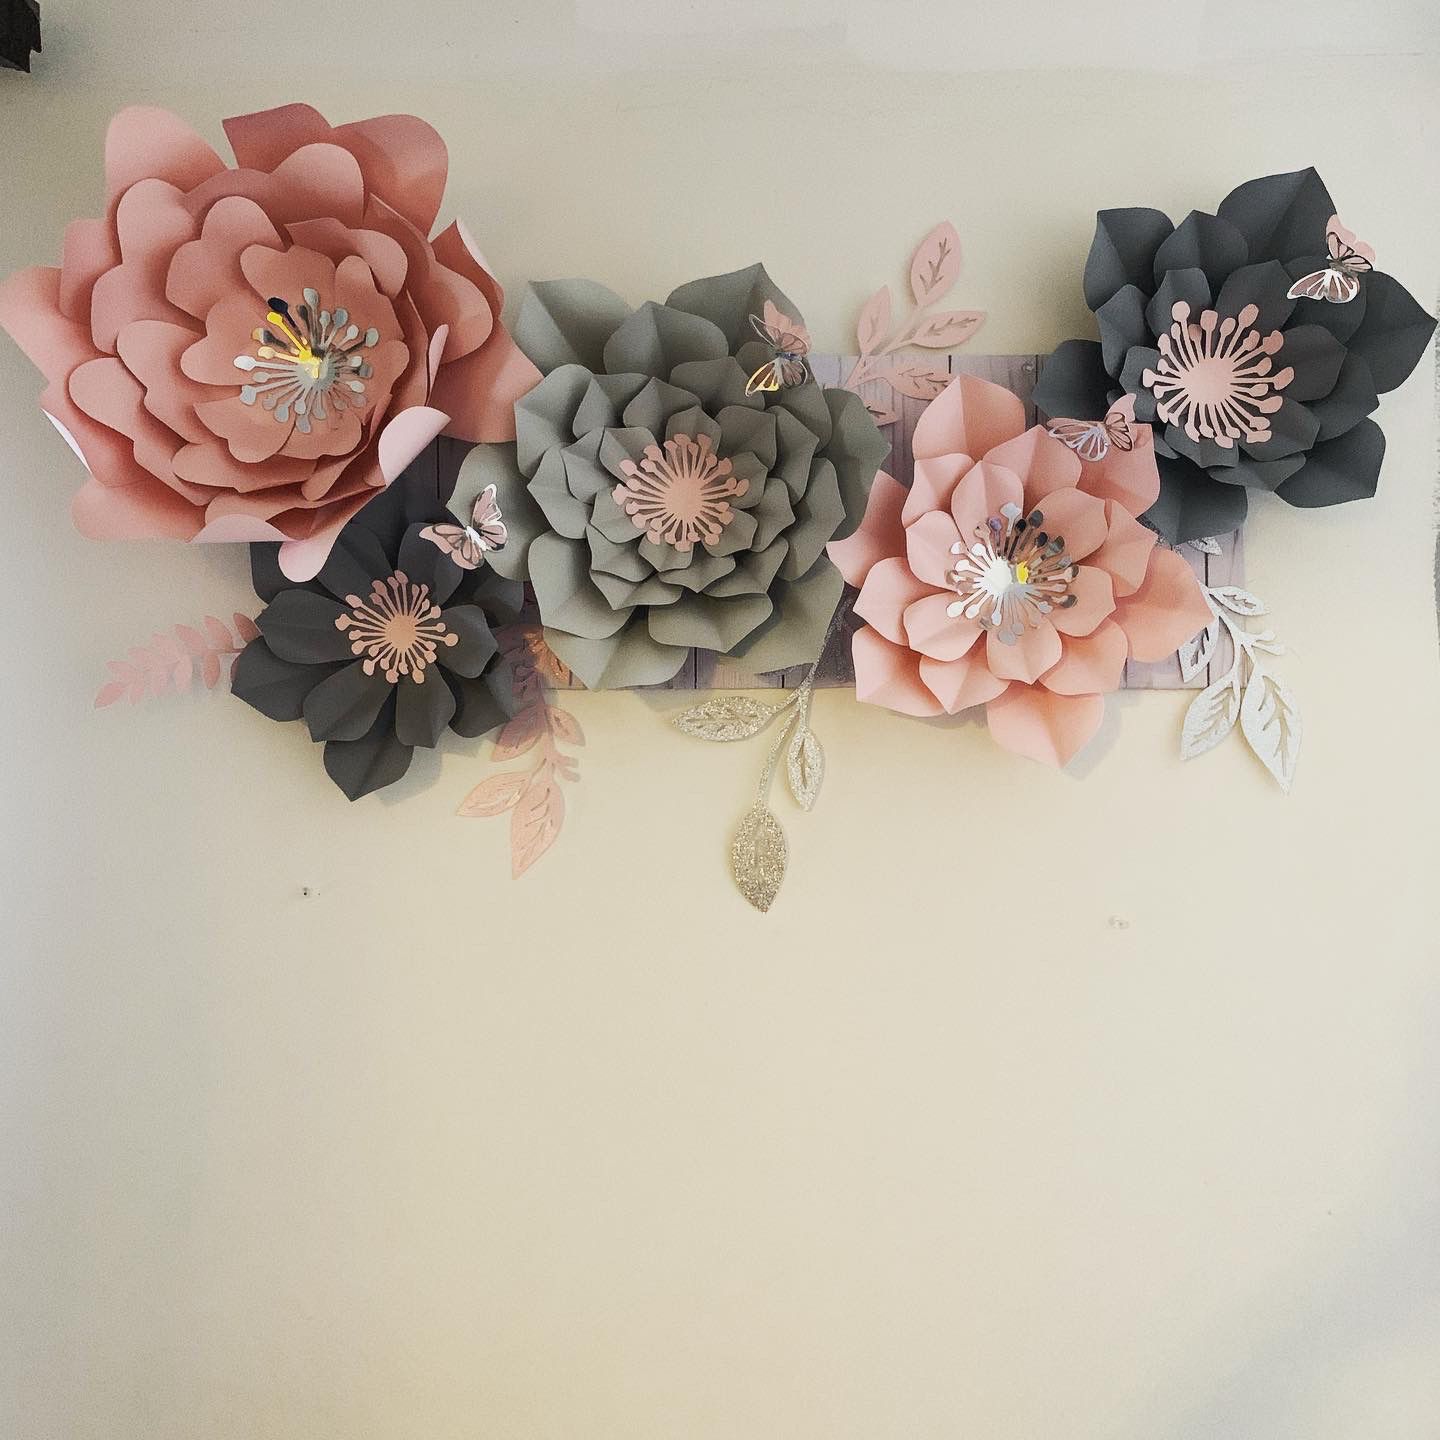 Gray and pink themed flowers 🌺